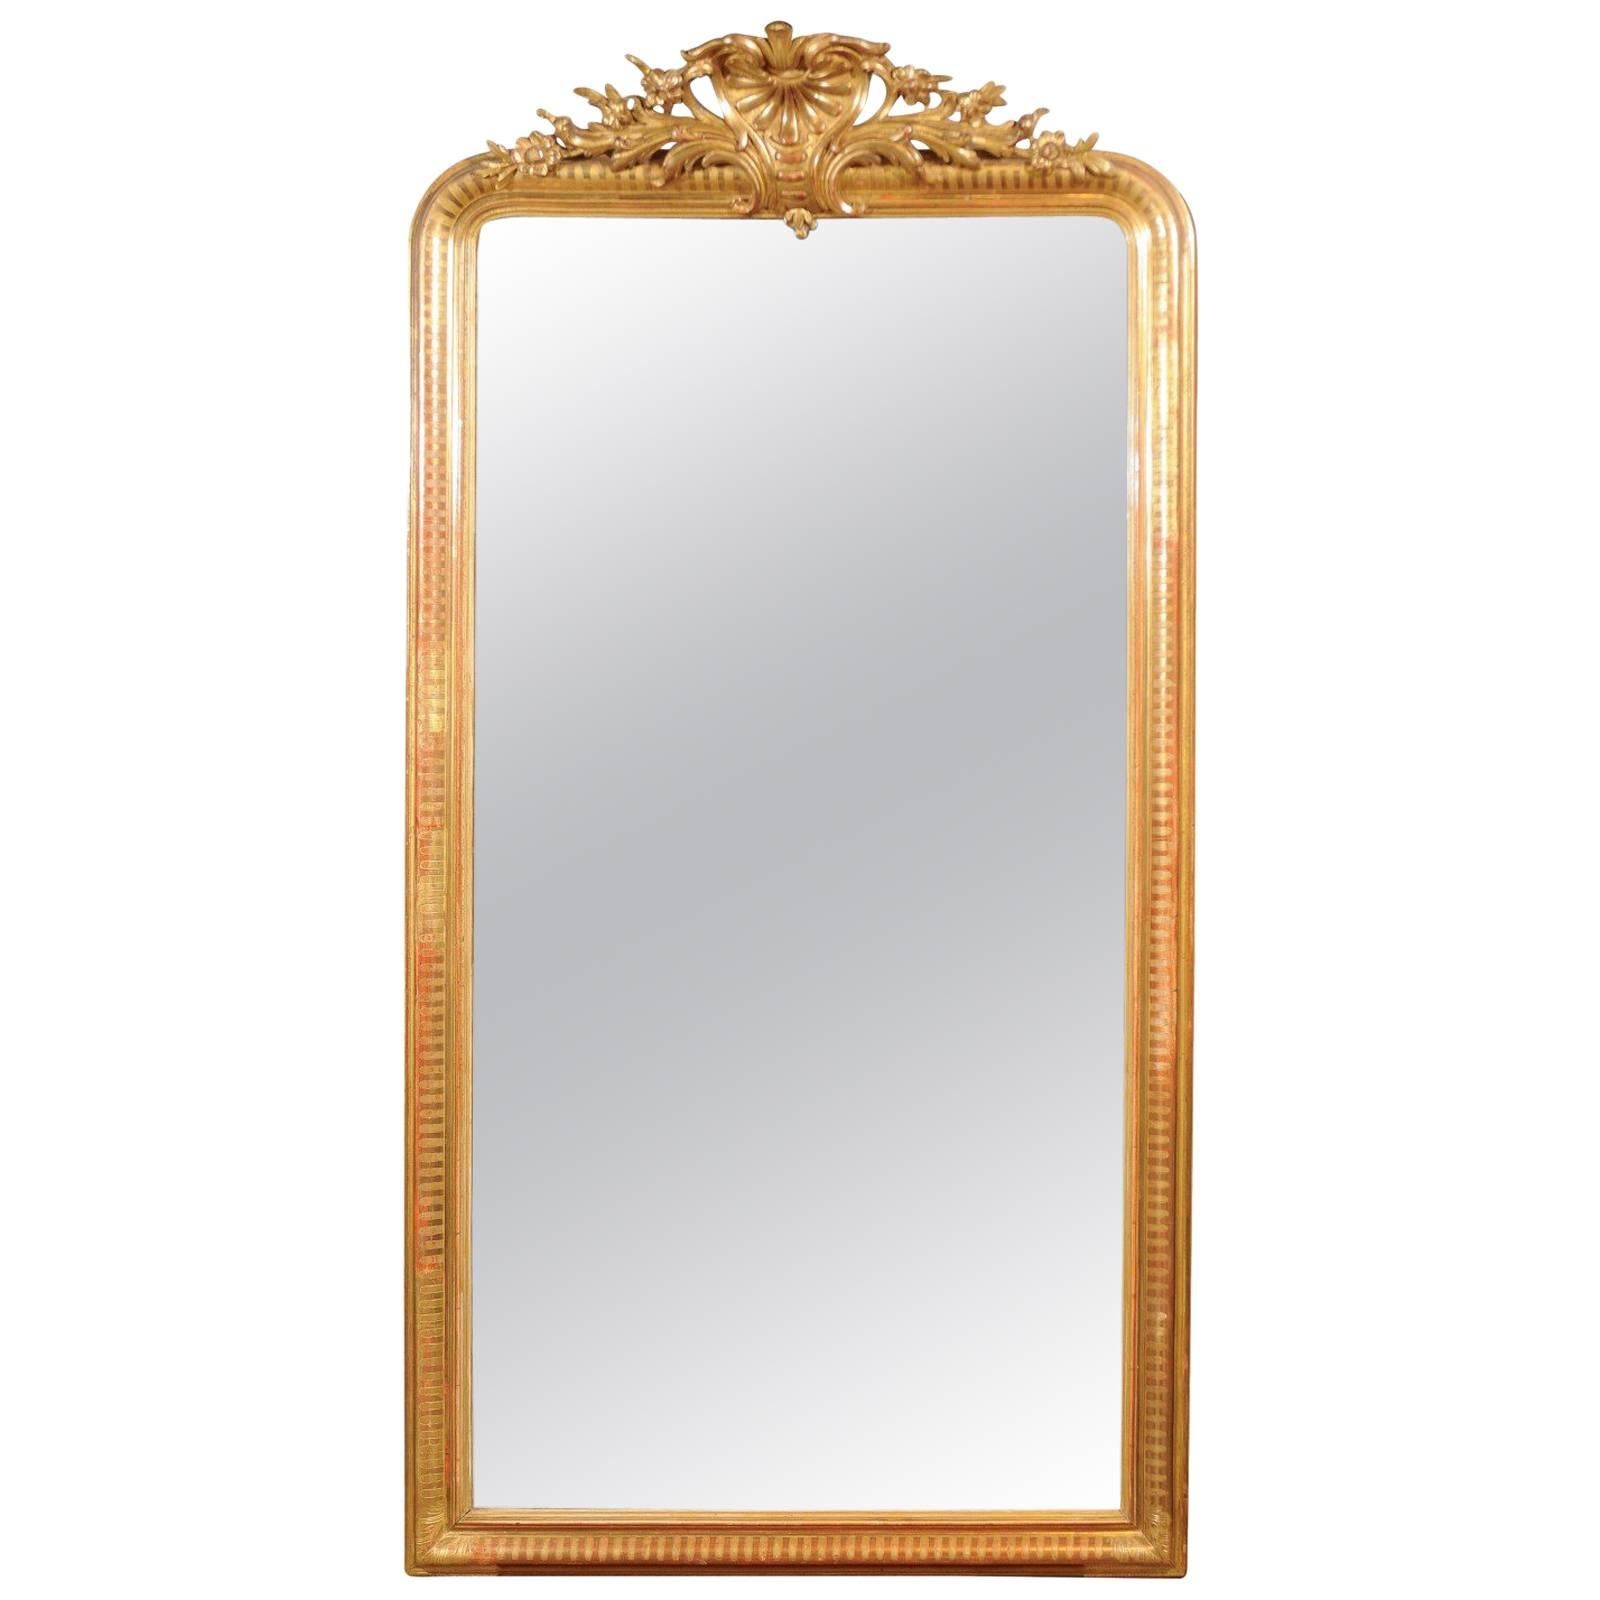 French Rococo Style Tall Giltwood Mirror with Carved Crest from the 1880s